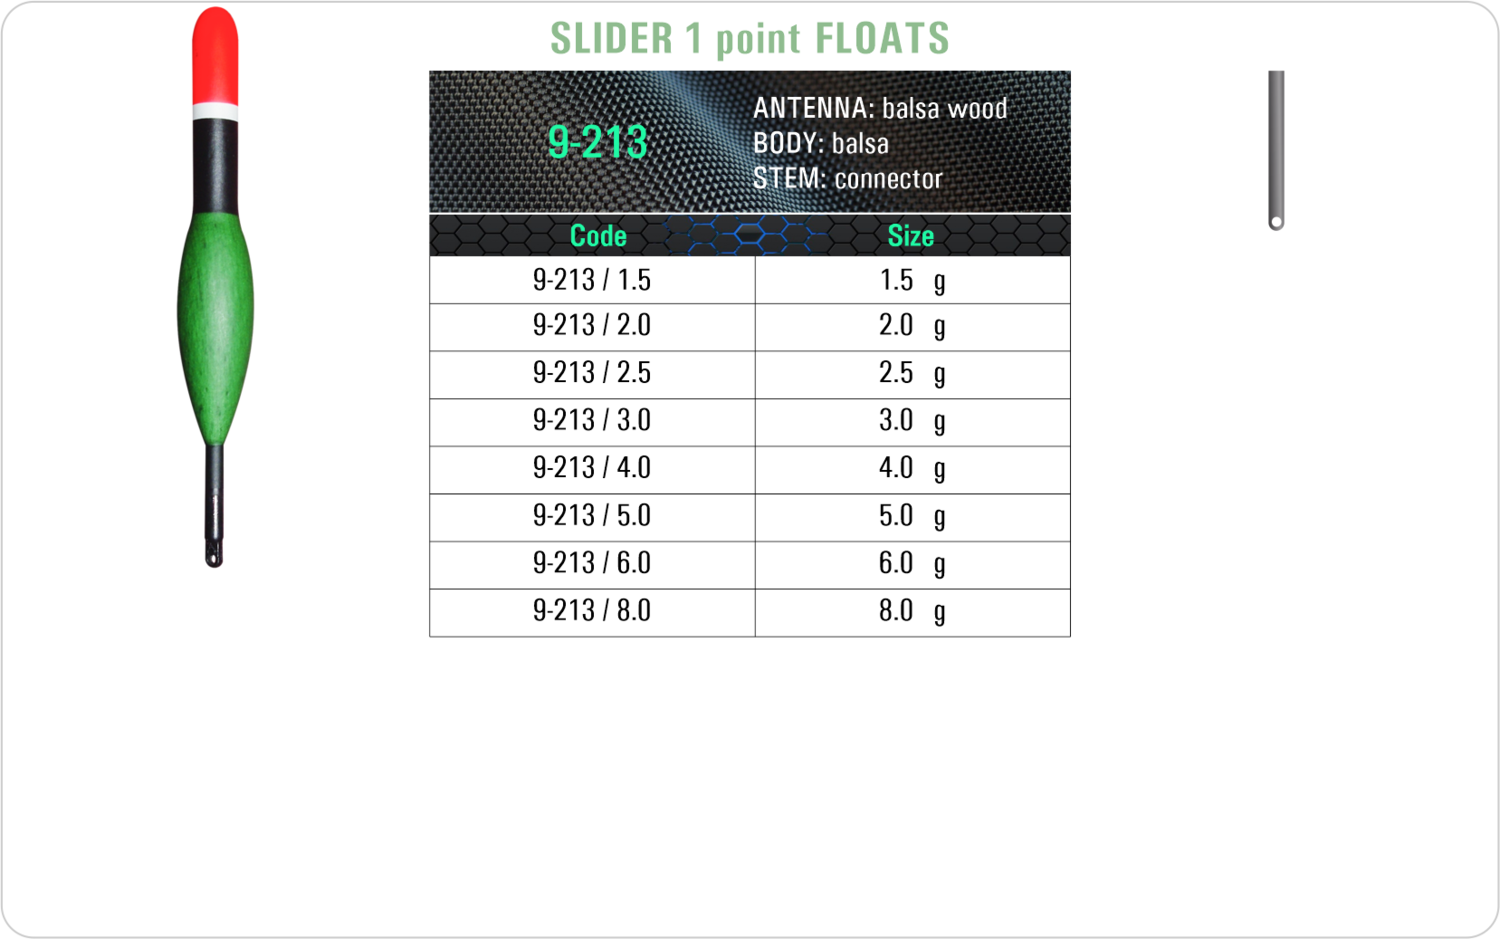 SF 9-213 - Lake and river float model and table containing an additional information about this float with different codes, sizes, types of the body, the stem and the antenna of the float.